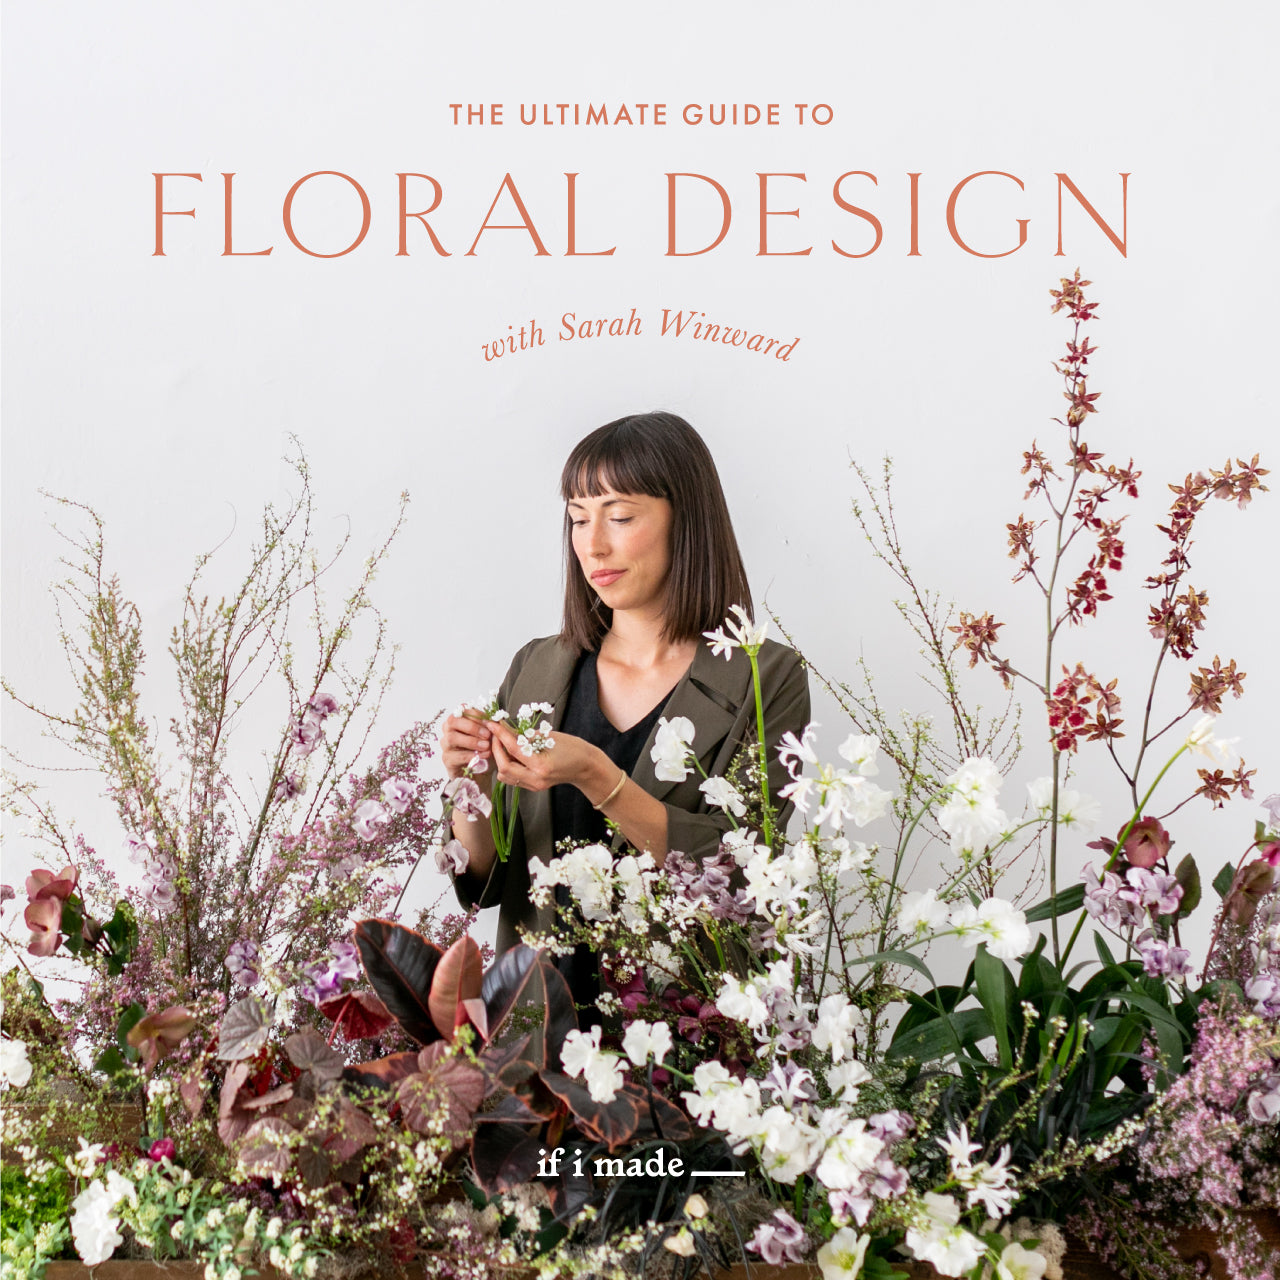 The Ultimate Guide to Floral Design with Sarah Winward (EGPP21) - 18 Payments of $99